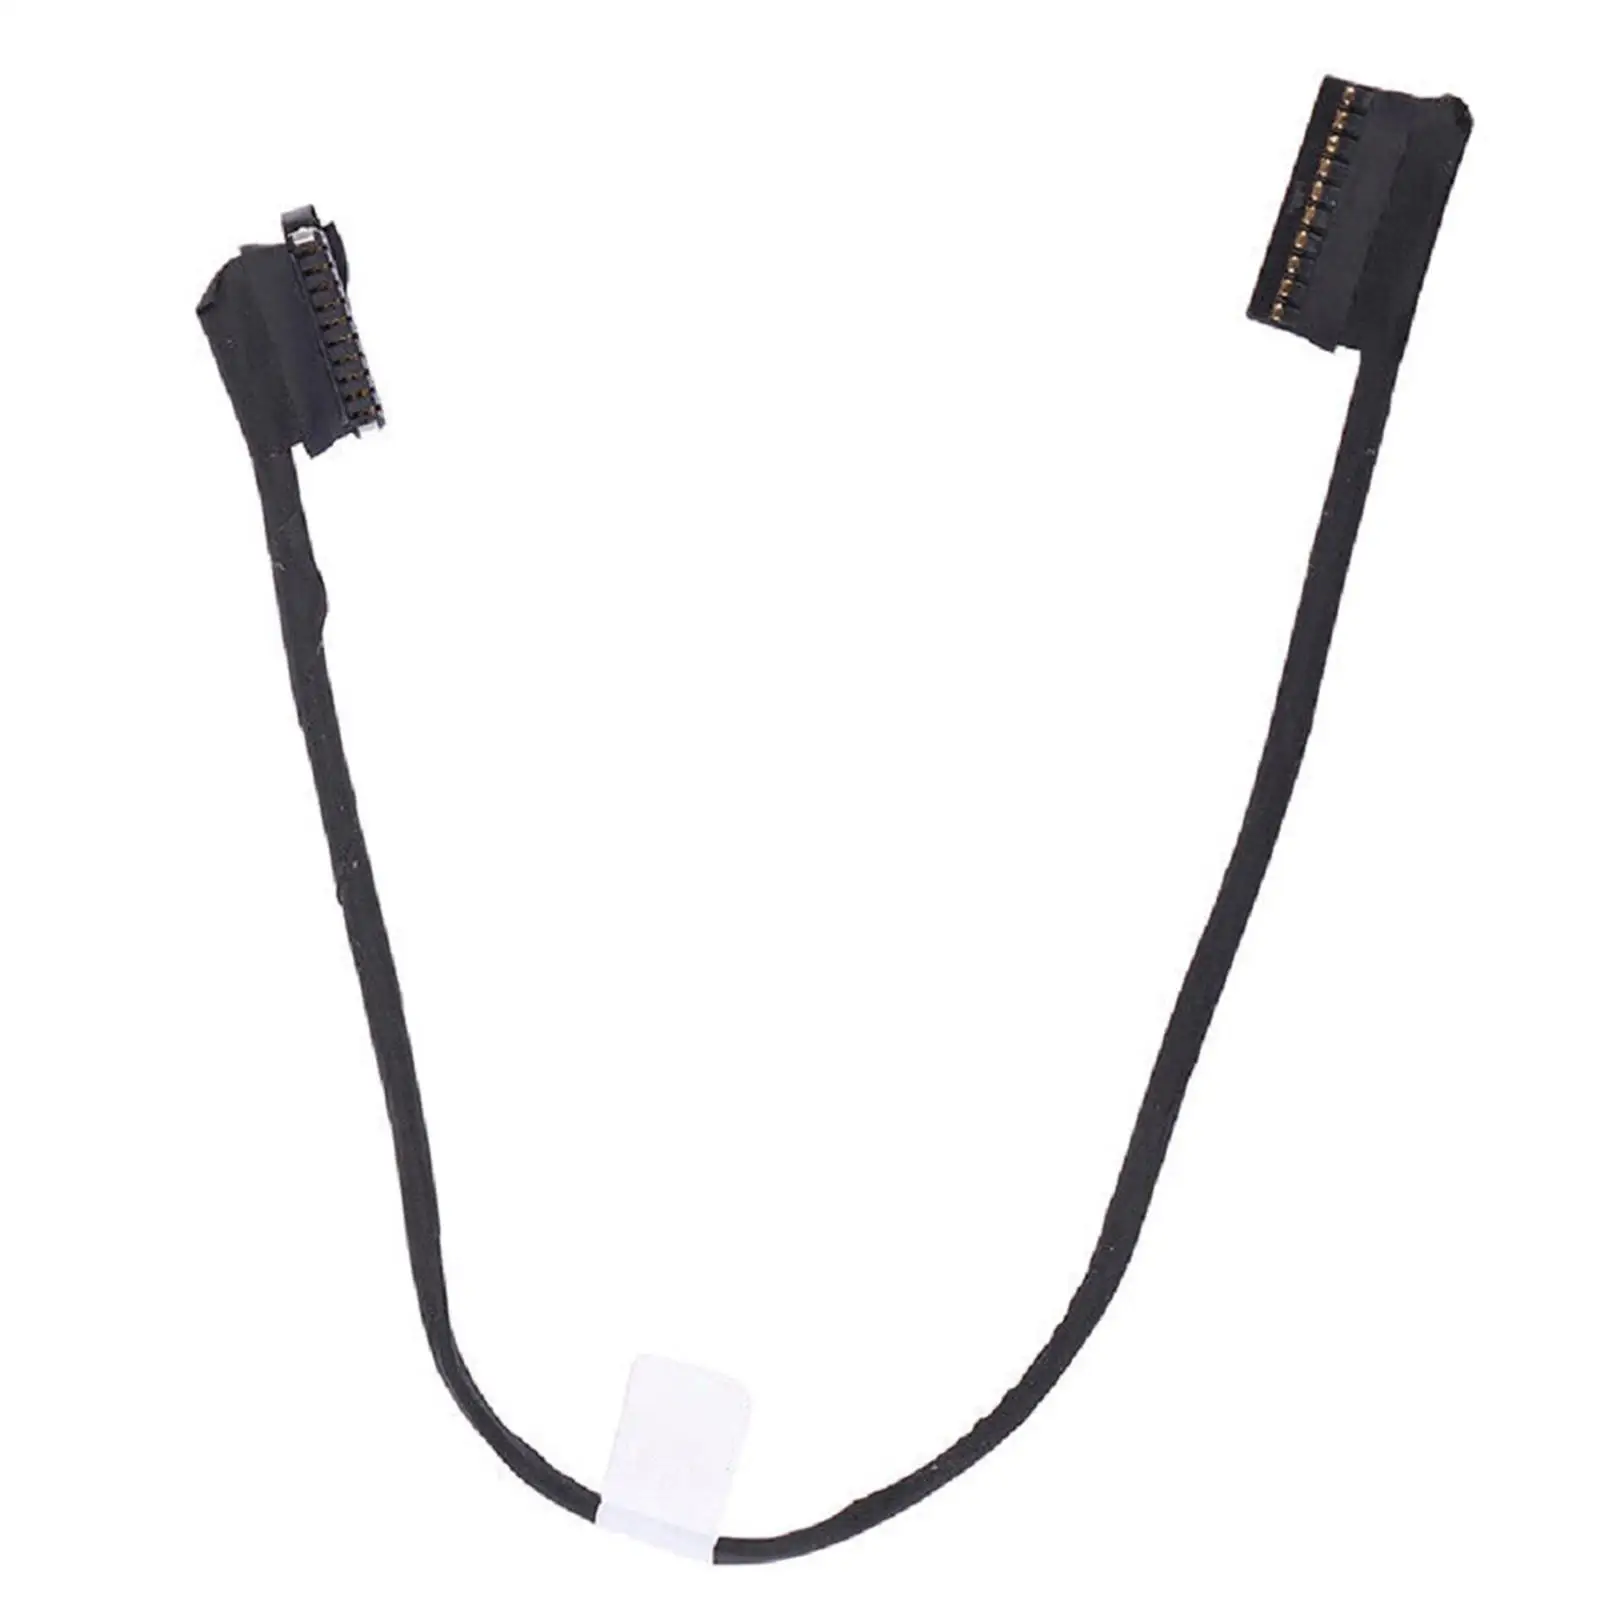 Laptop Battery Cable Cord, Durable, Replacement for Dell M3520 3530 CDM80 Part Accessory